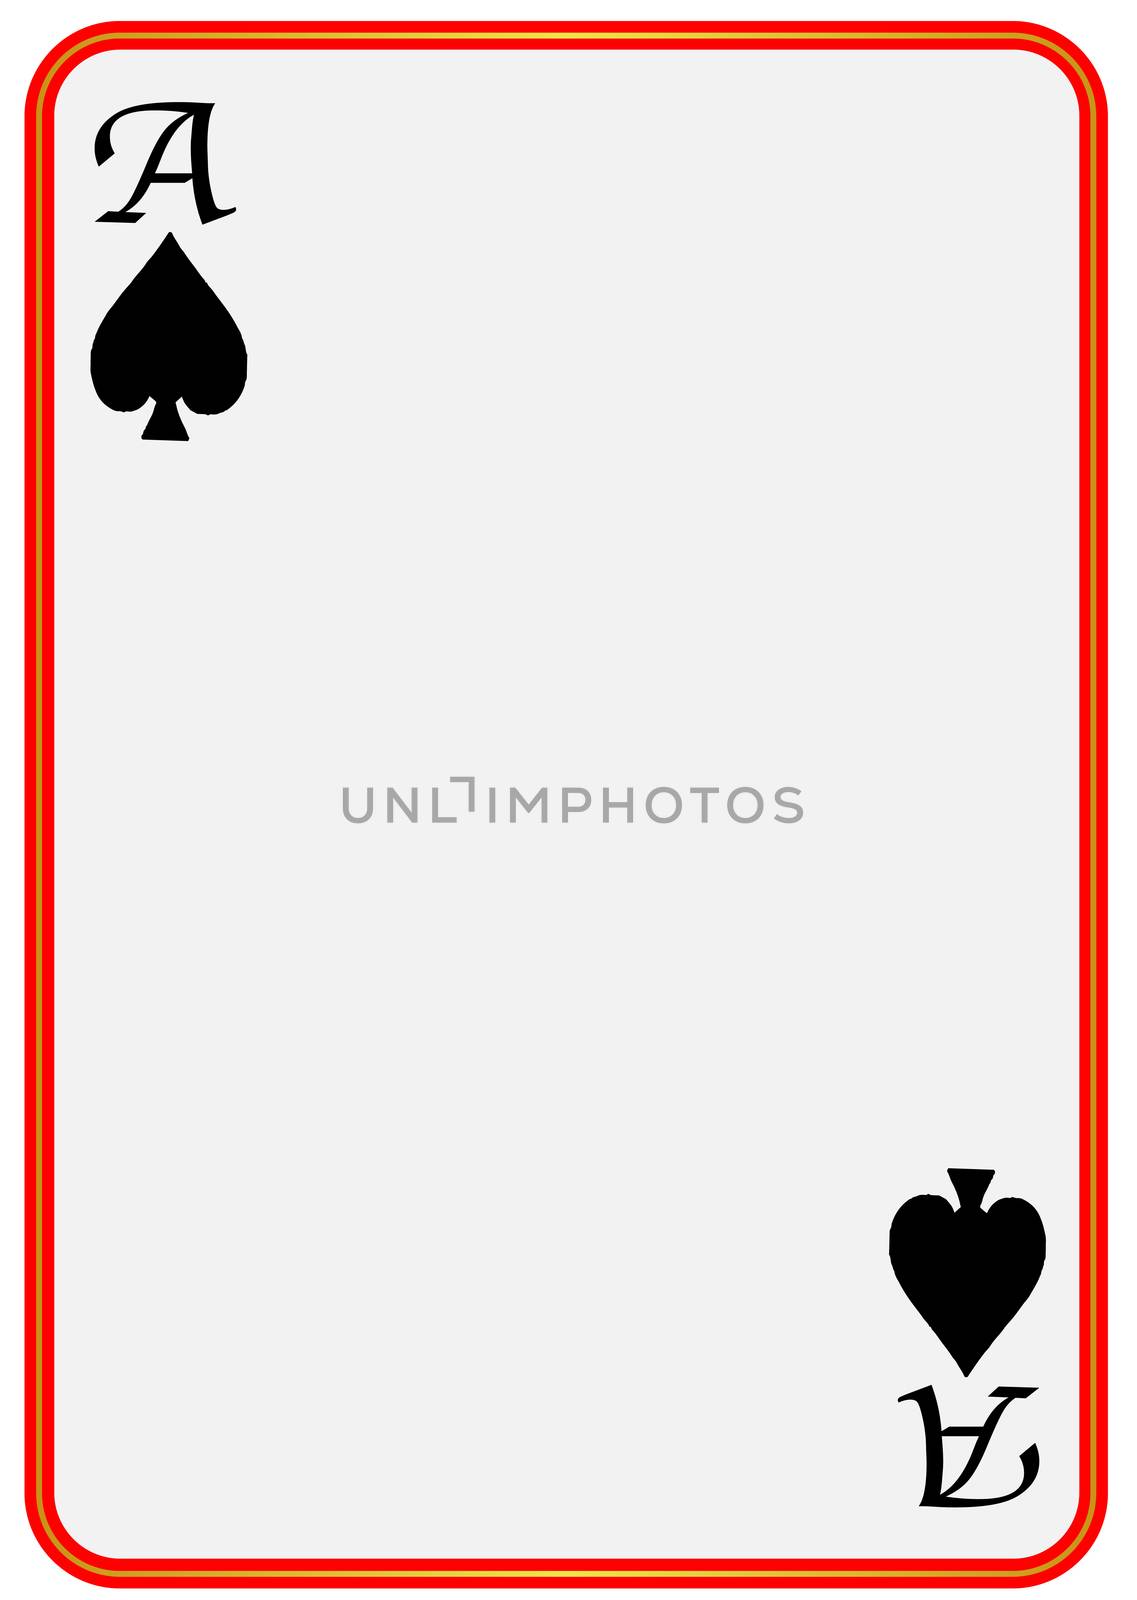 A blank Ace of Spades playing card over a white background